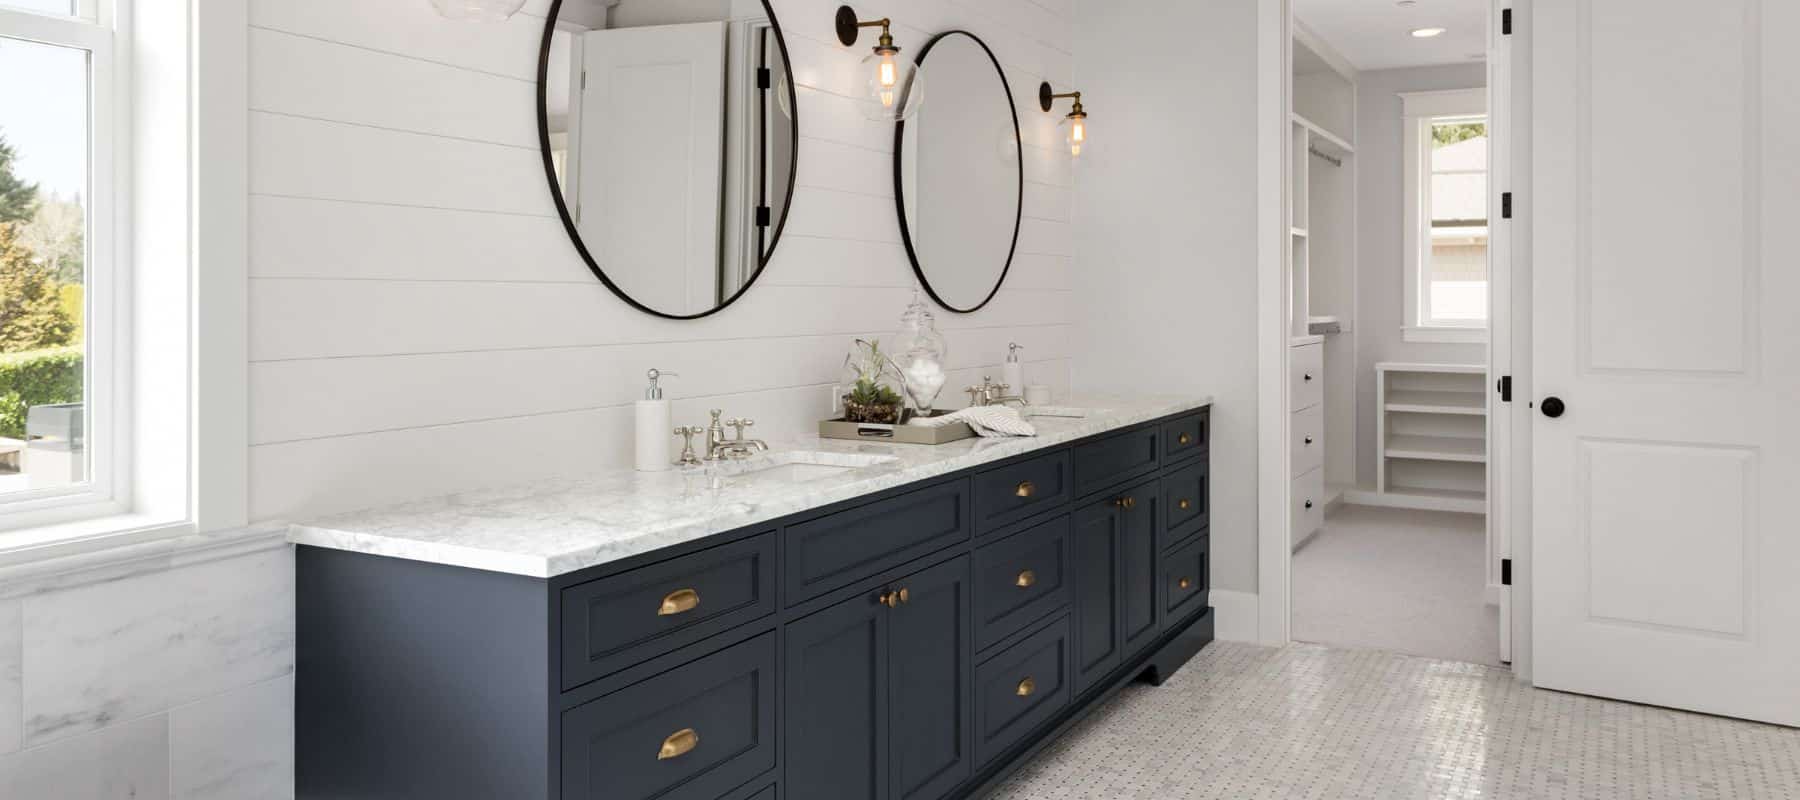 A stylish bathroom interior featuring a long vanity with dark navy cabinets and a white marble countertop. Above the vanity, two large round mirrors with black frames are hung on a white shiplap wall, flanked by elegant wall-mounted light fixtures with exposed bulbs. The floor is tiled with small white hexagonal pieces, and a glimpse of a built-in white closet adds to the clean and modern aesthetic of the space